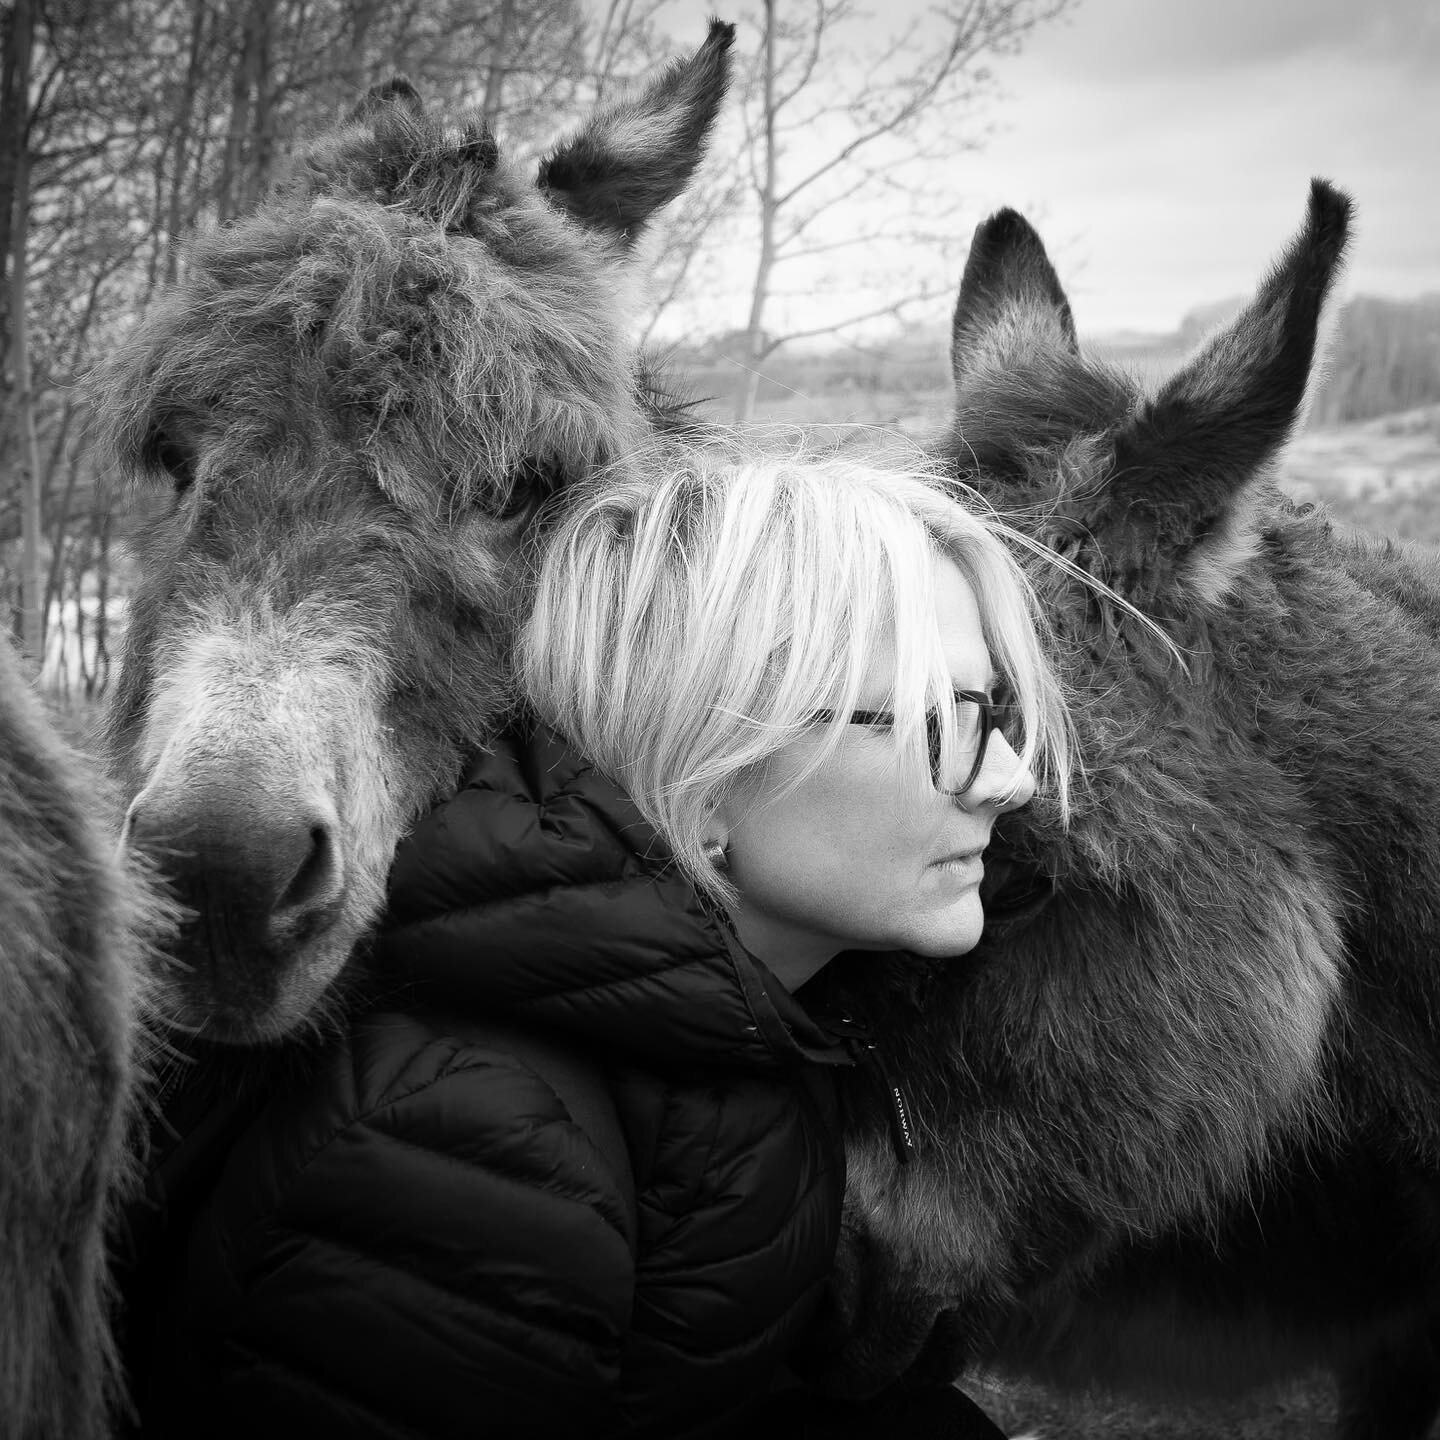 &quot;Listening is the most important offer we can give to each other.&quot; 

My dear Somatic Transformation teacher, Rita Bozi, during our Equine &ndash; and apparently donkey &ndash; Therapy morning in Calgary last week. 

Who's healing whom? We h